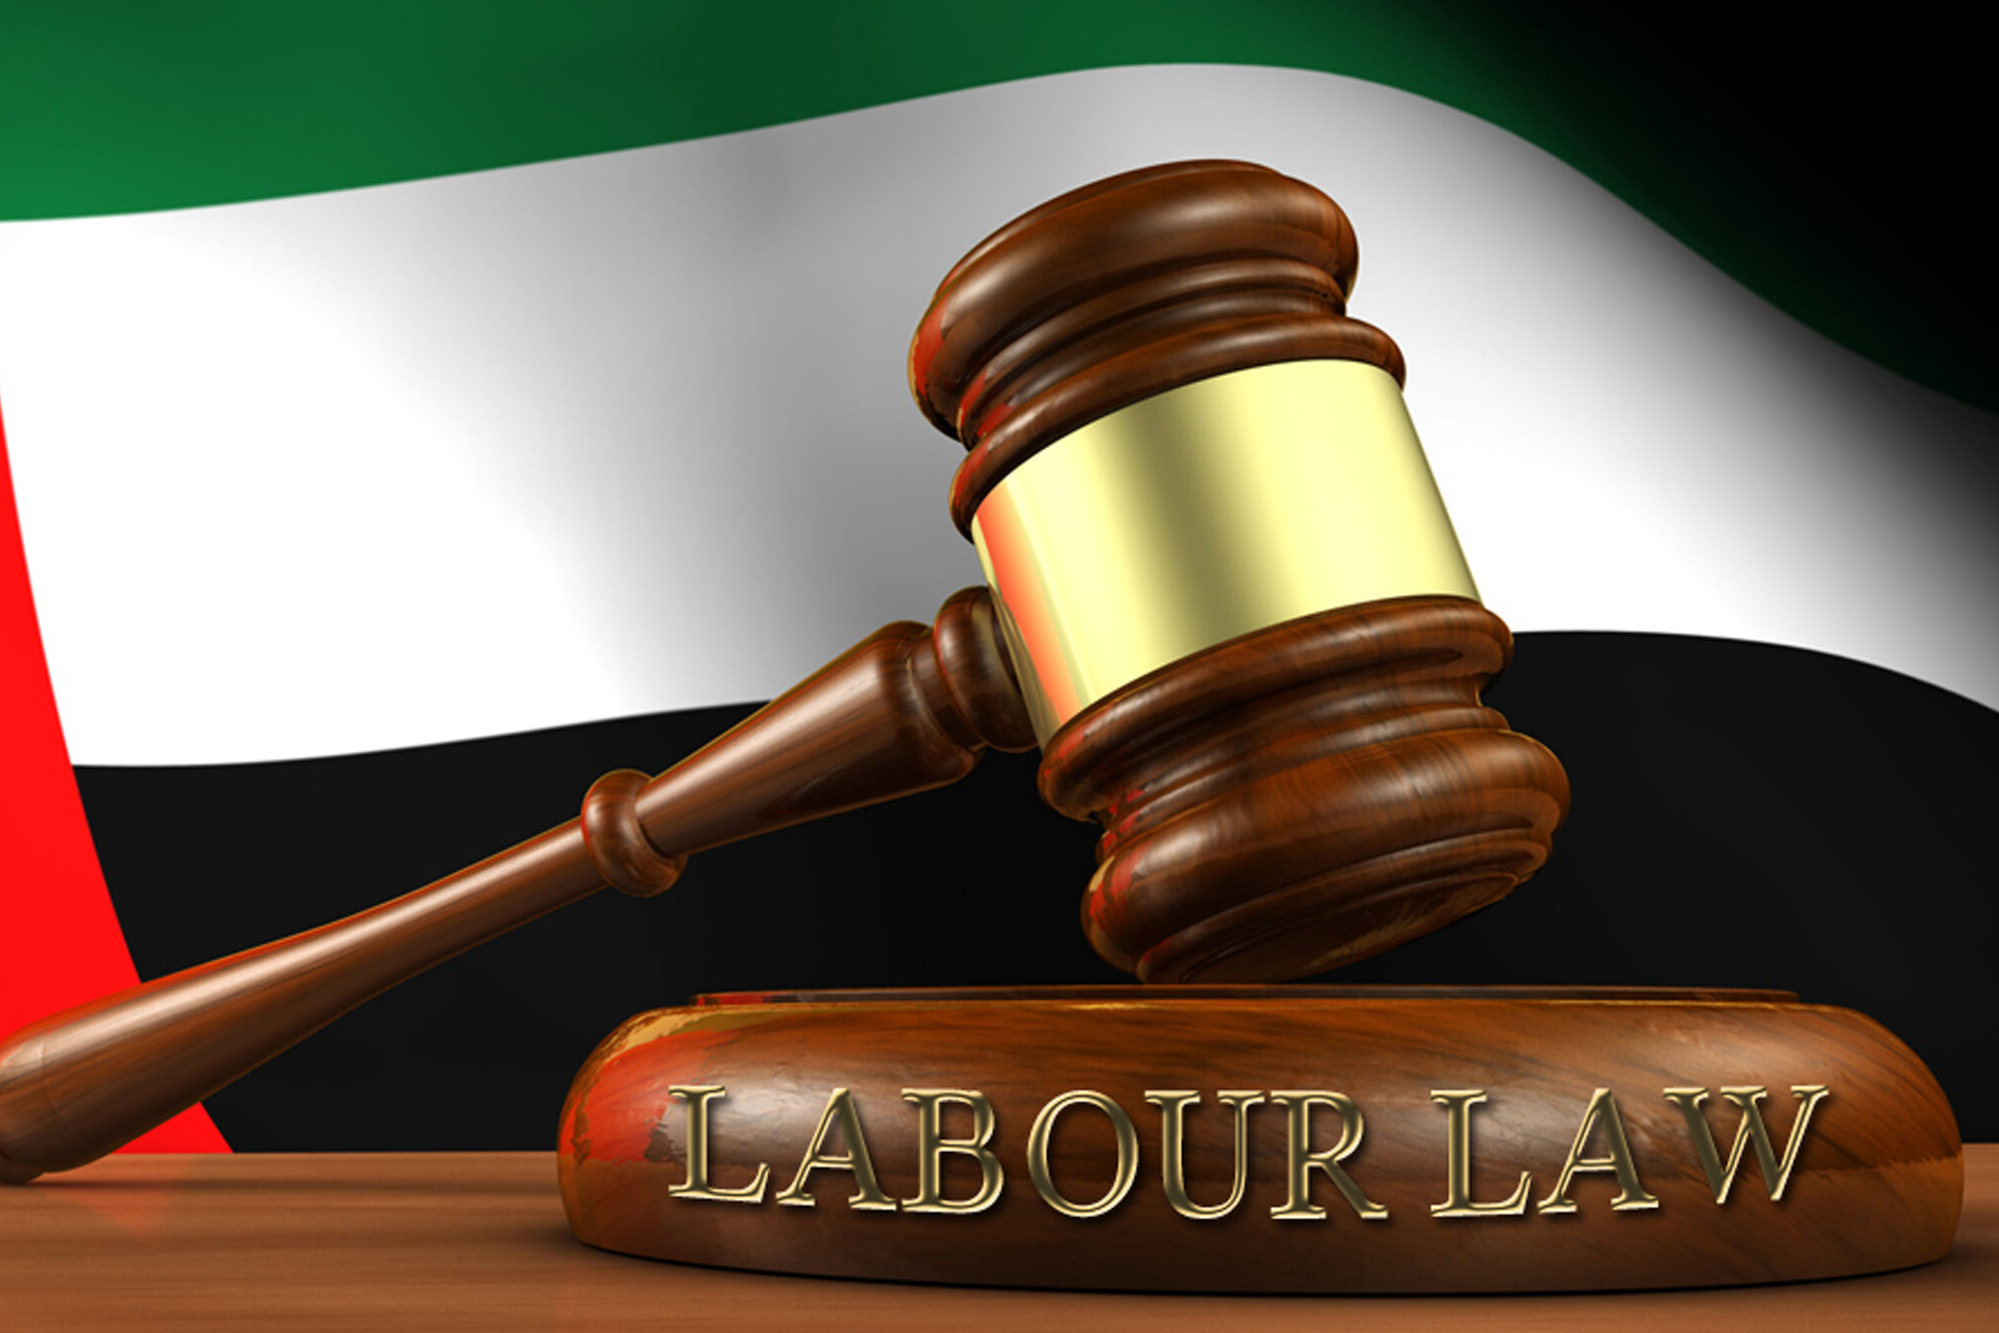 New UAE Labor Law In Force